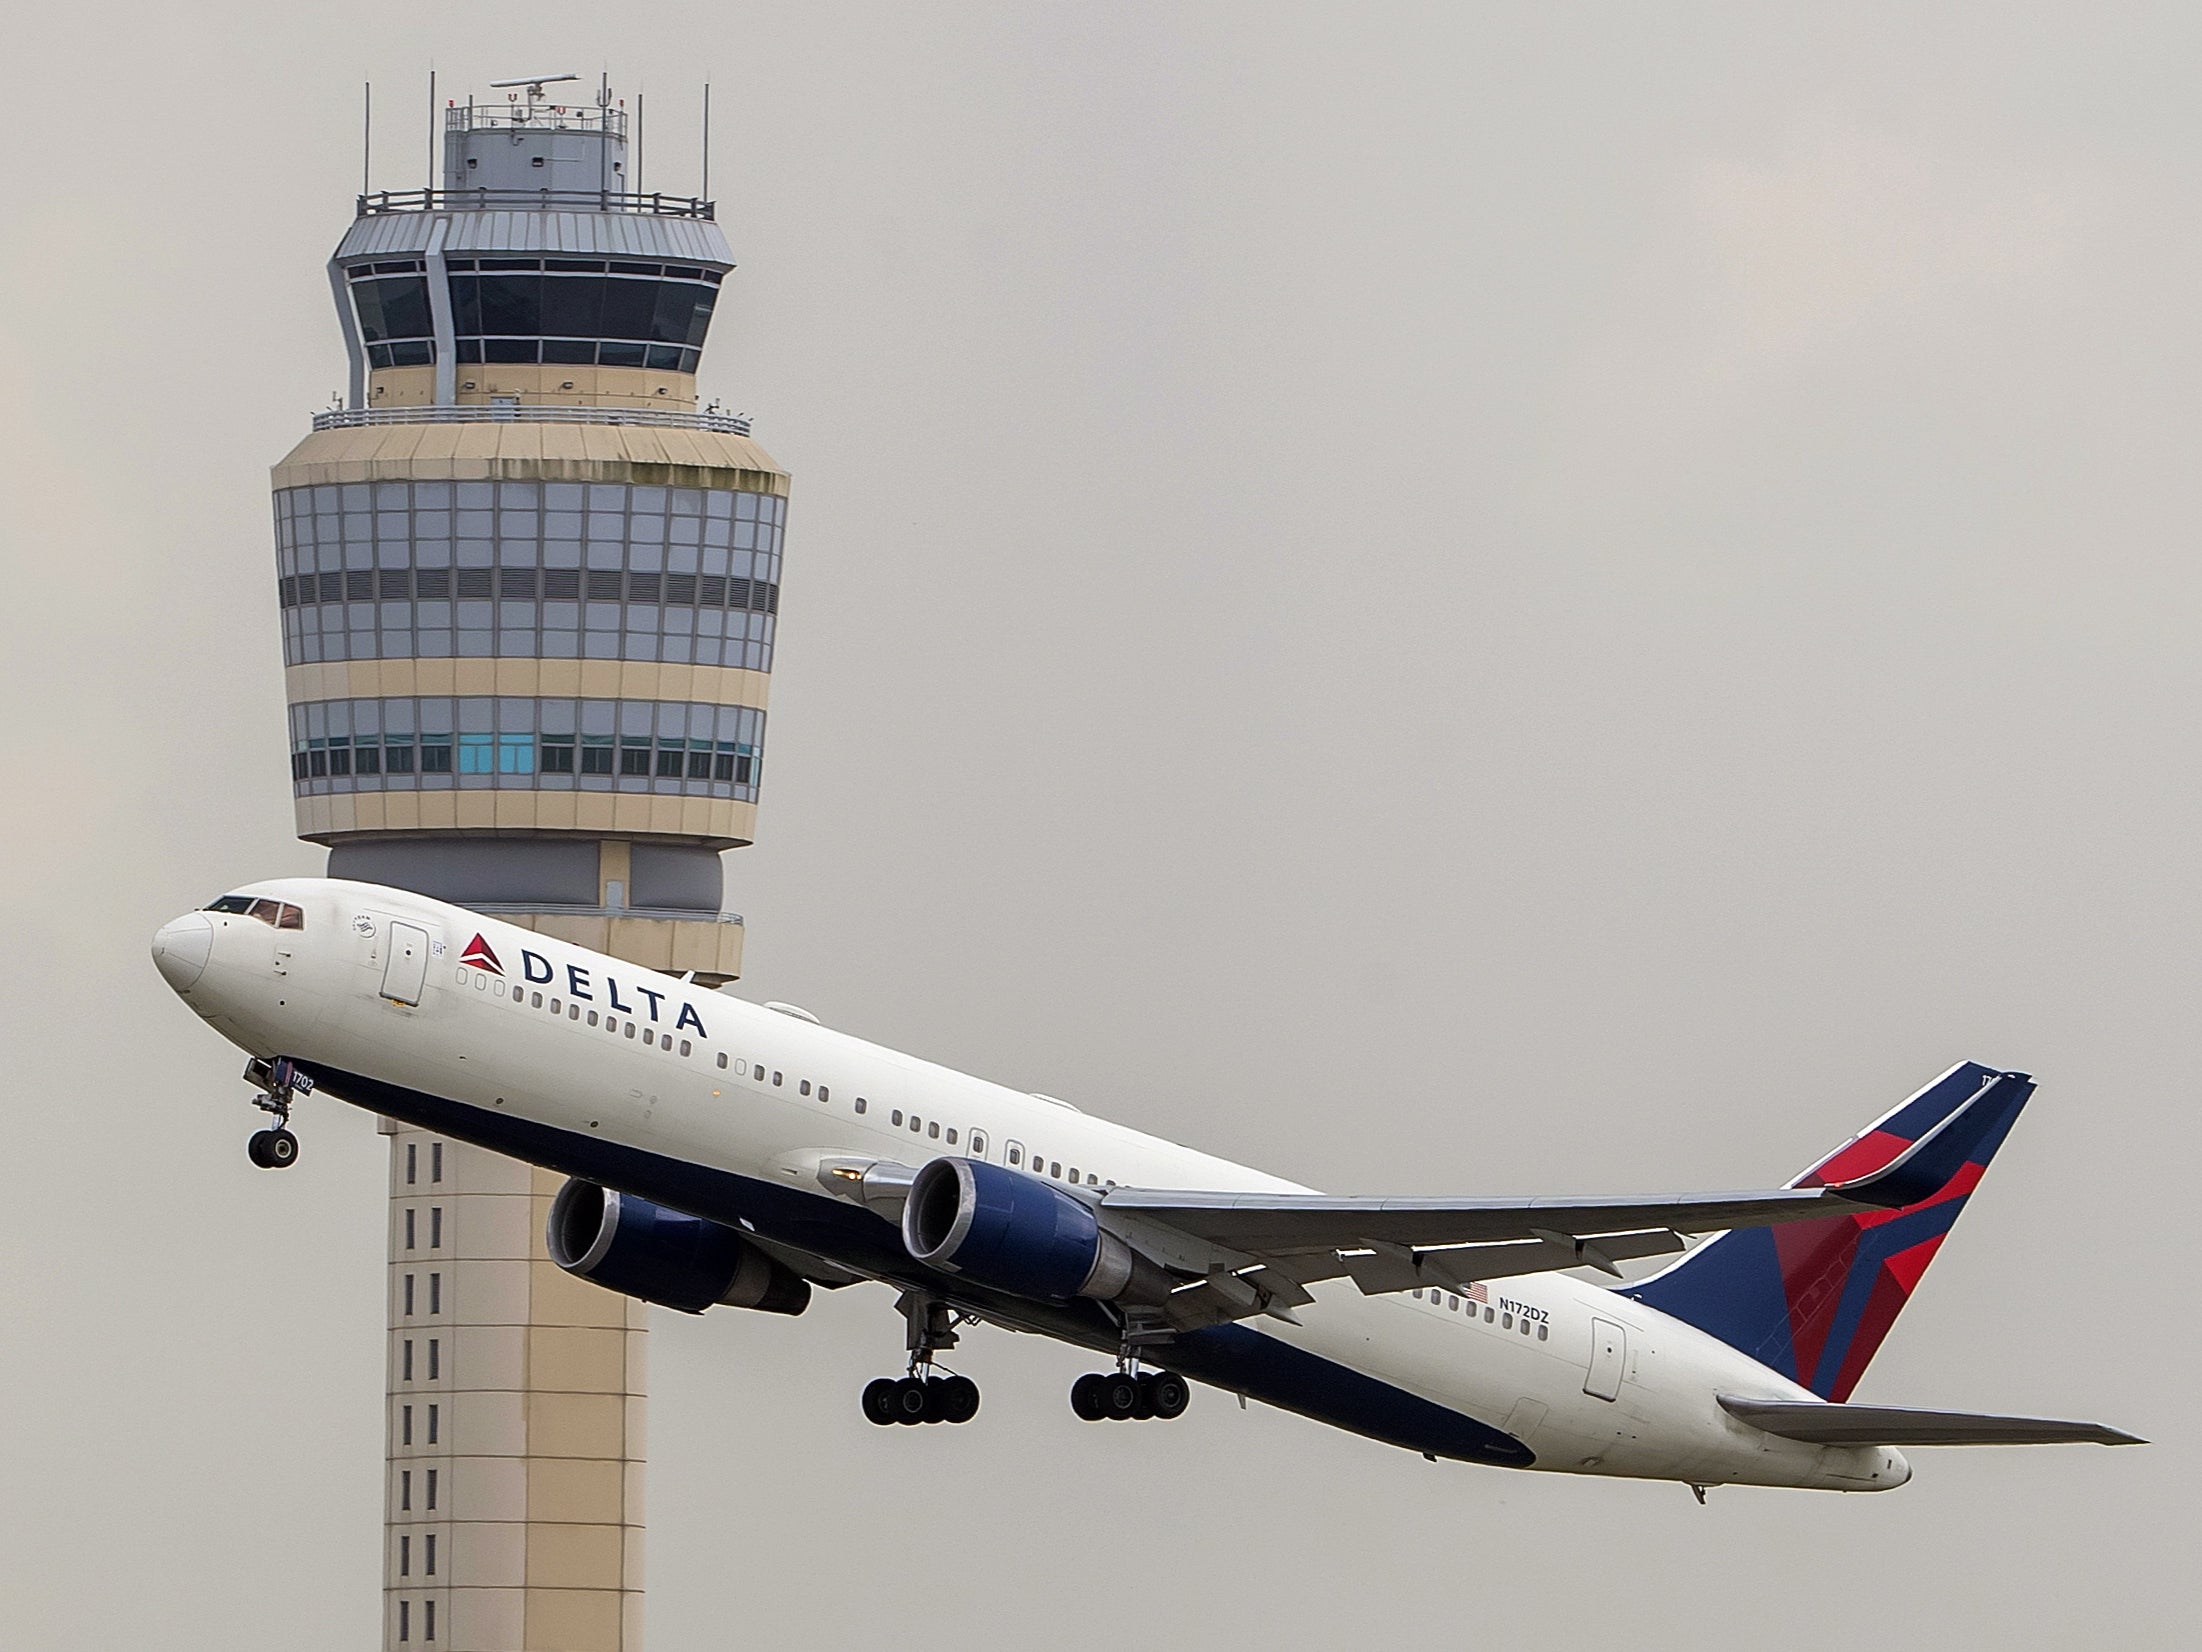 A Delta Air Lines Boeing 767-332 jet (Tail number N172DZ) takes off from Hartsfield-Jackson Atlanta International Airport in Atlanta, Georgia, on 15 July 2020